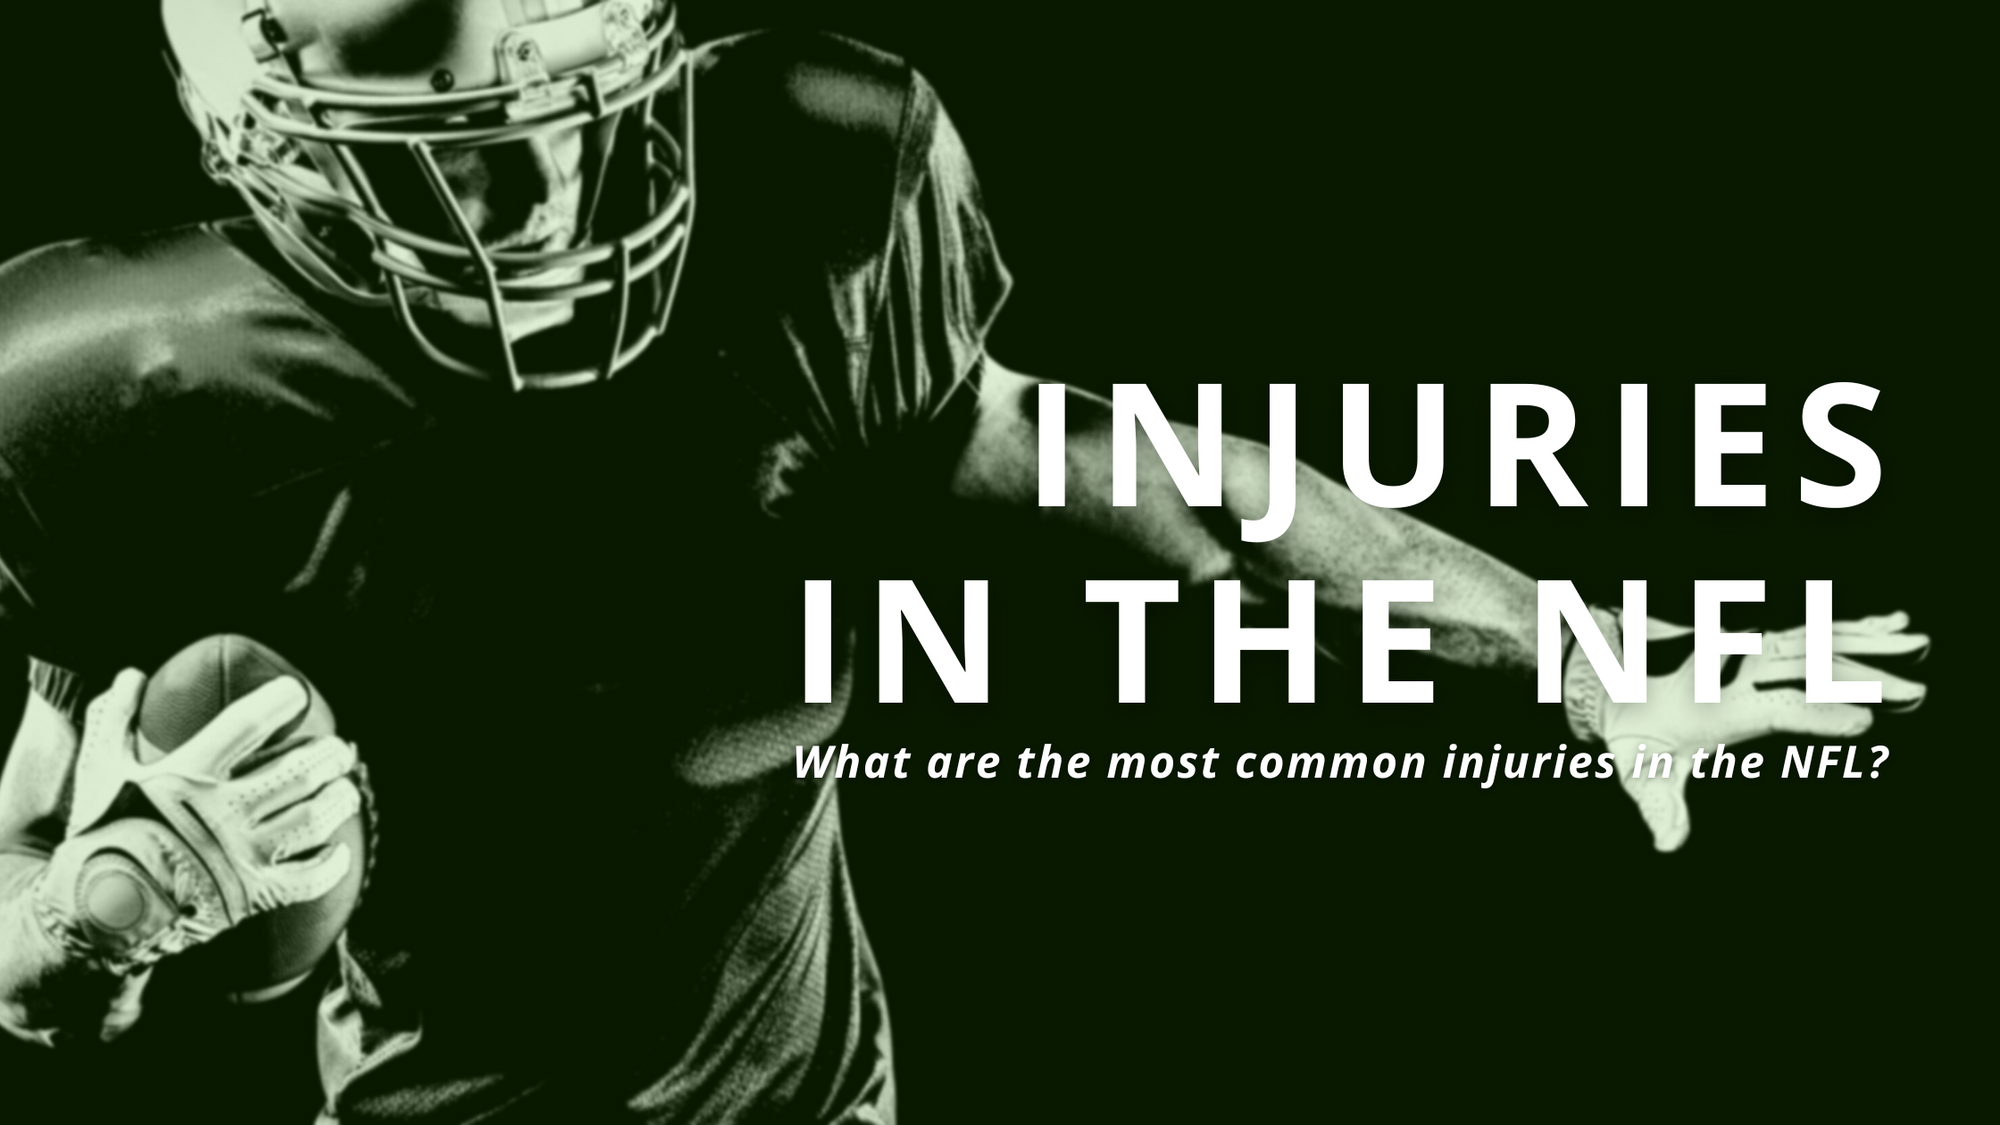 The most common injuries in the NFL